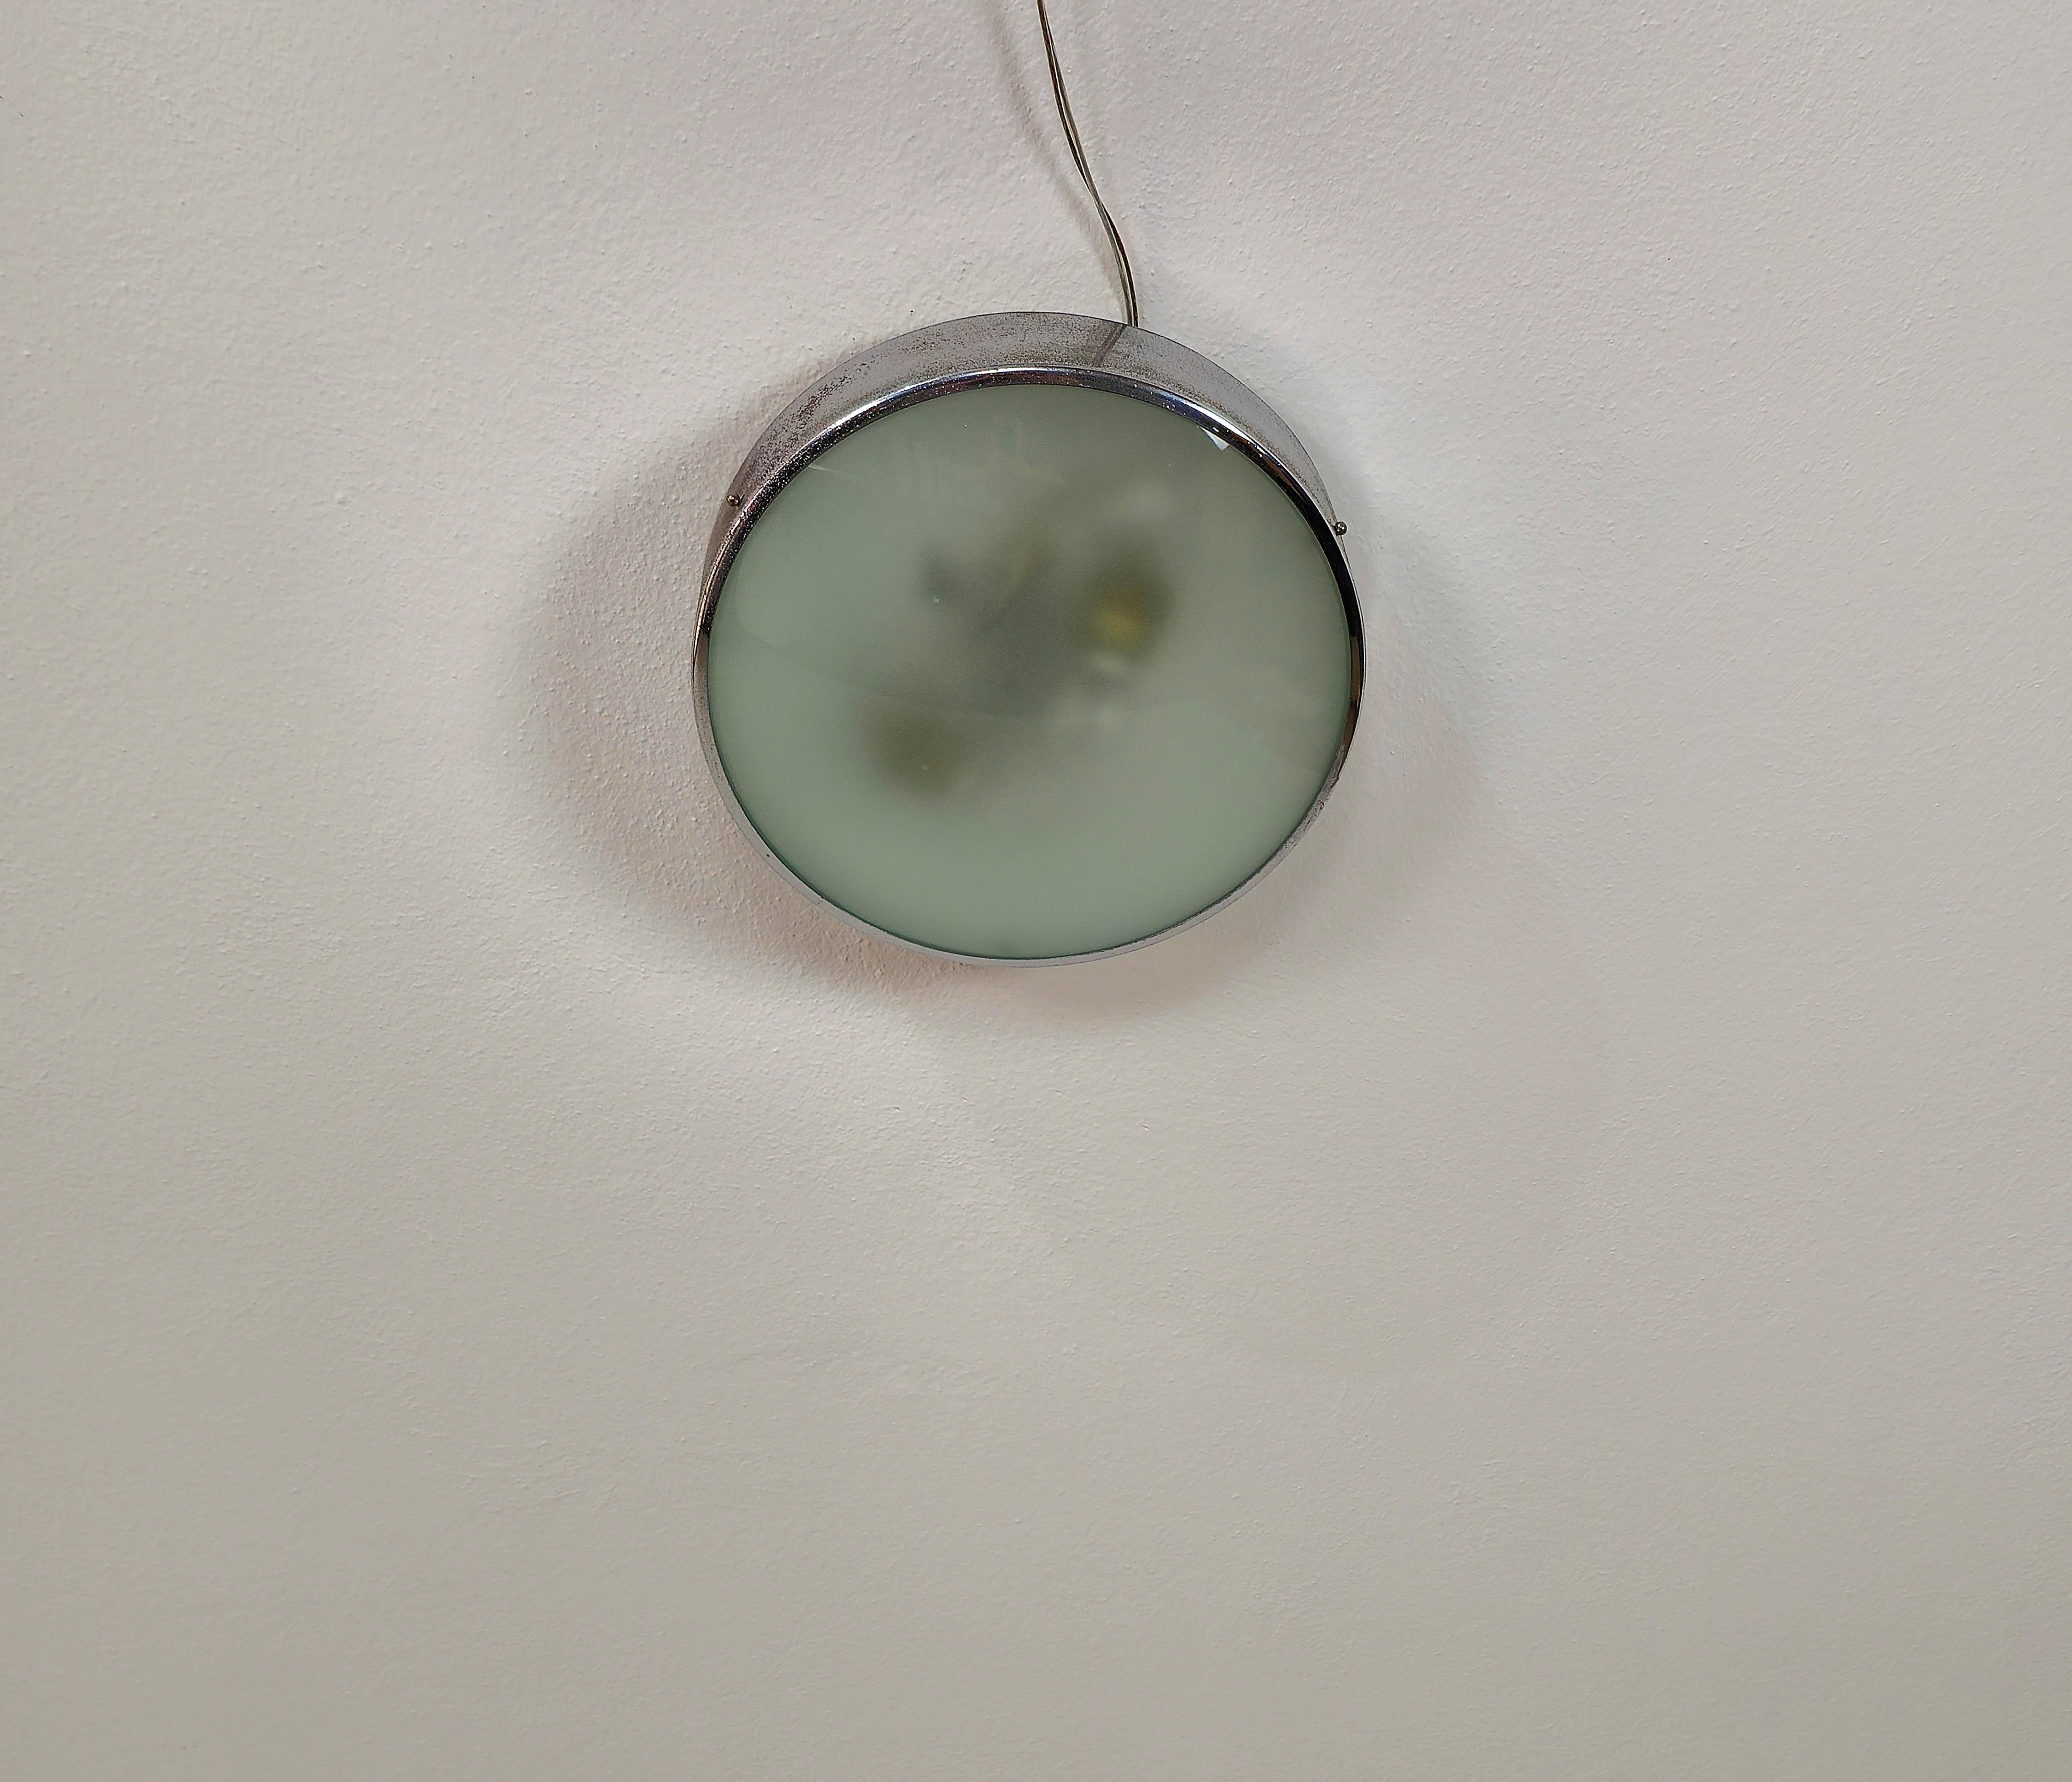 Ceiling/flush lamp produced in the 60s in the style of Fontana Arte.
The ceiling lamp has a structure with 2 E27 lights in enamelled metal with a border in chromed metal which together support a concave opaque glass in the shade of Nile